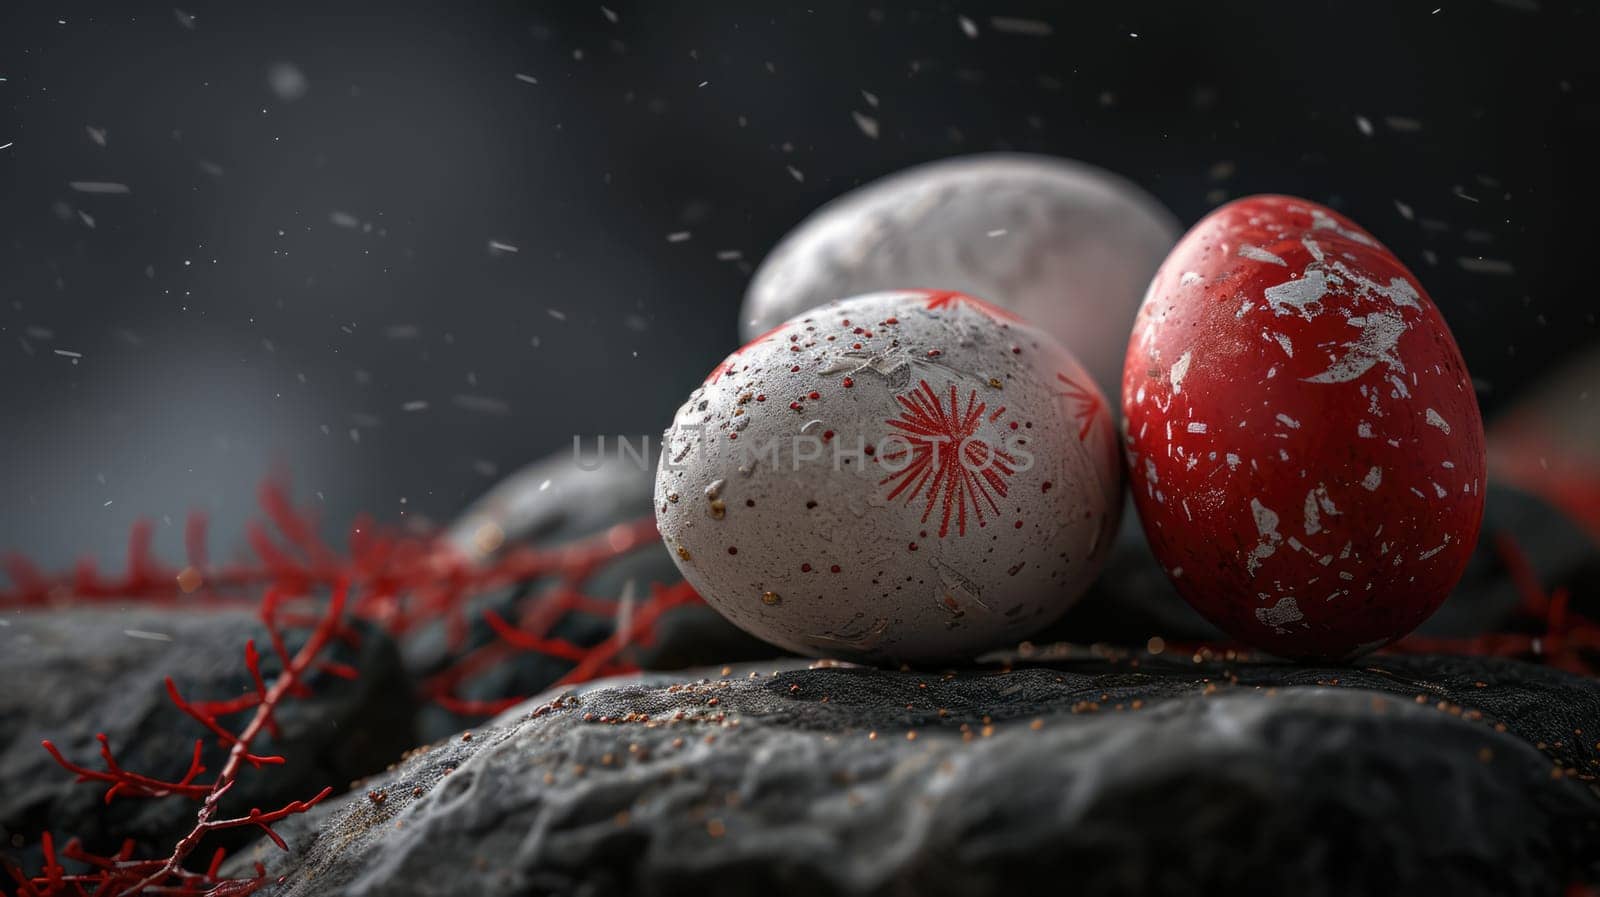 Red and white Easter Eggs on dark Background. Happy Easter eggs by JuliaDorian